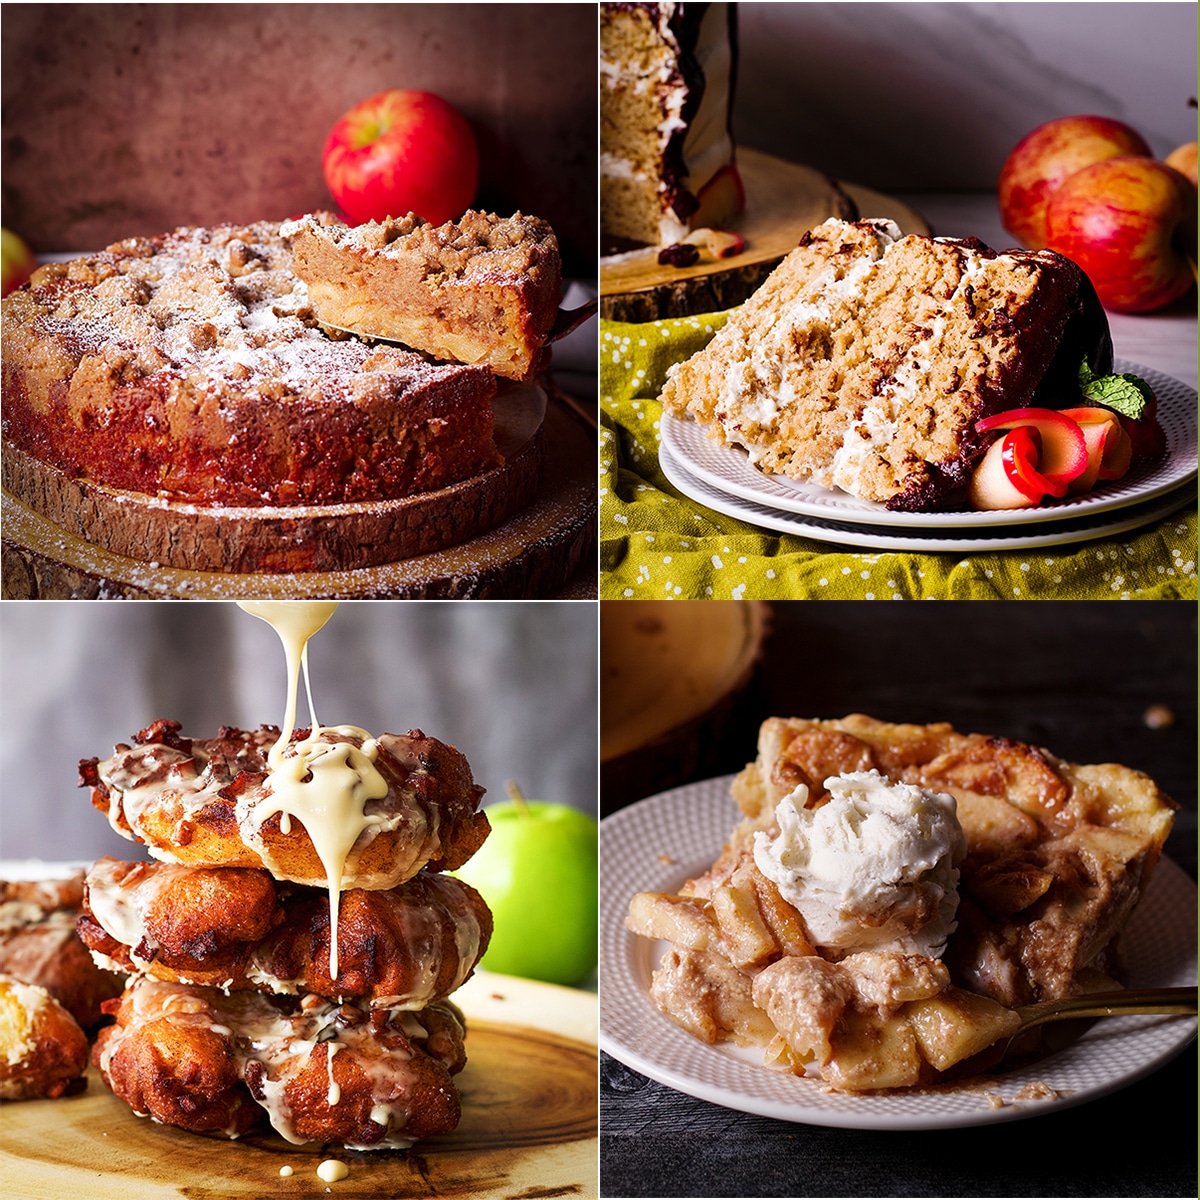 Four of the best apple recipes to bake in the fall including french apple cake, apple cider cake, apple fritters, and German apple pie.